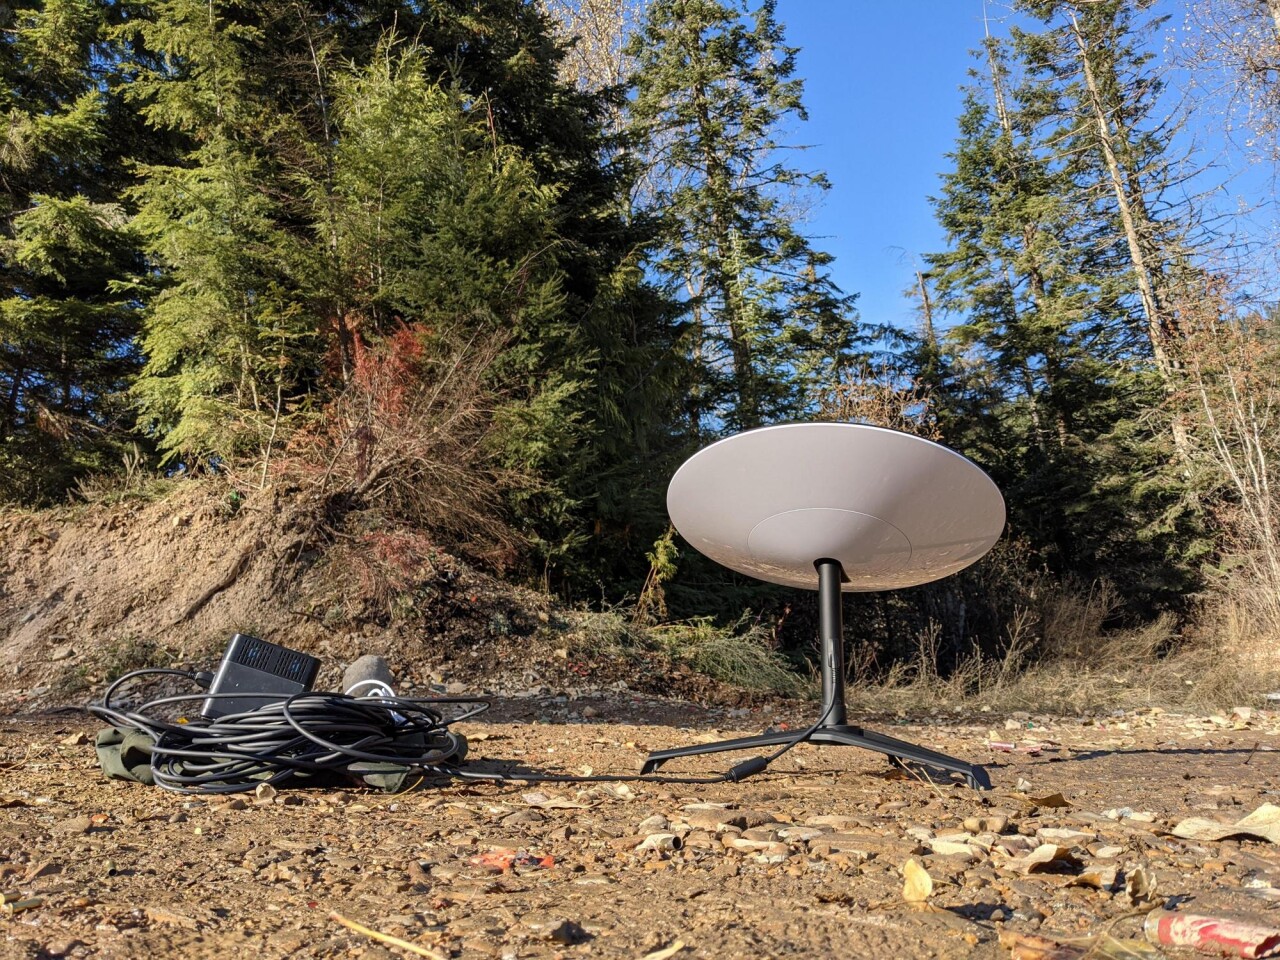 Starlink satellite dish setup in the Idaho panhandle's Coeur d'Alene National Forest. Photo by Wandering-coder.